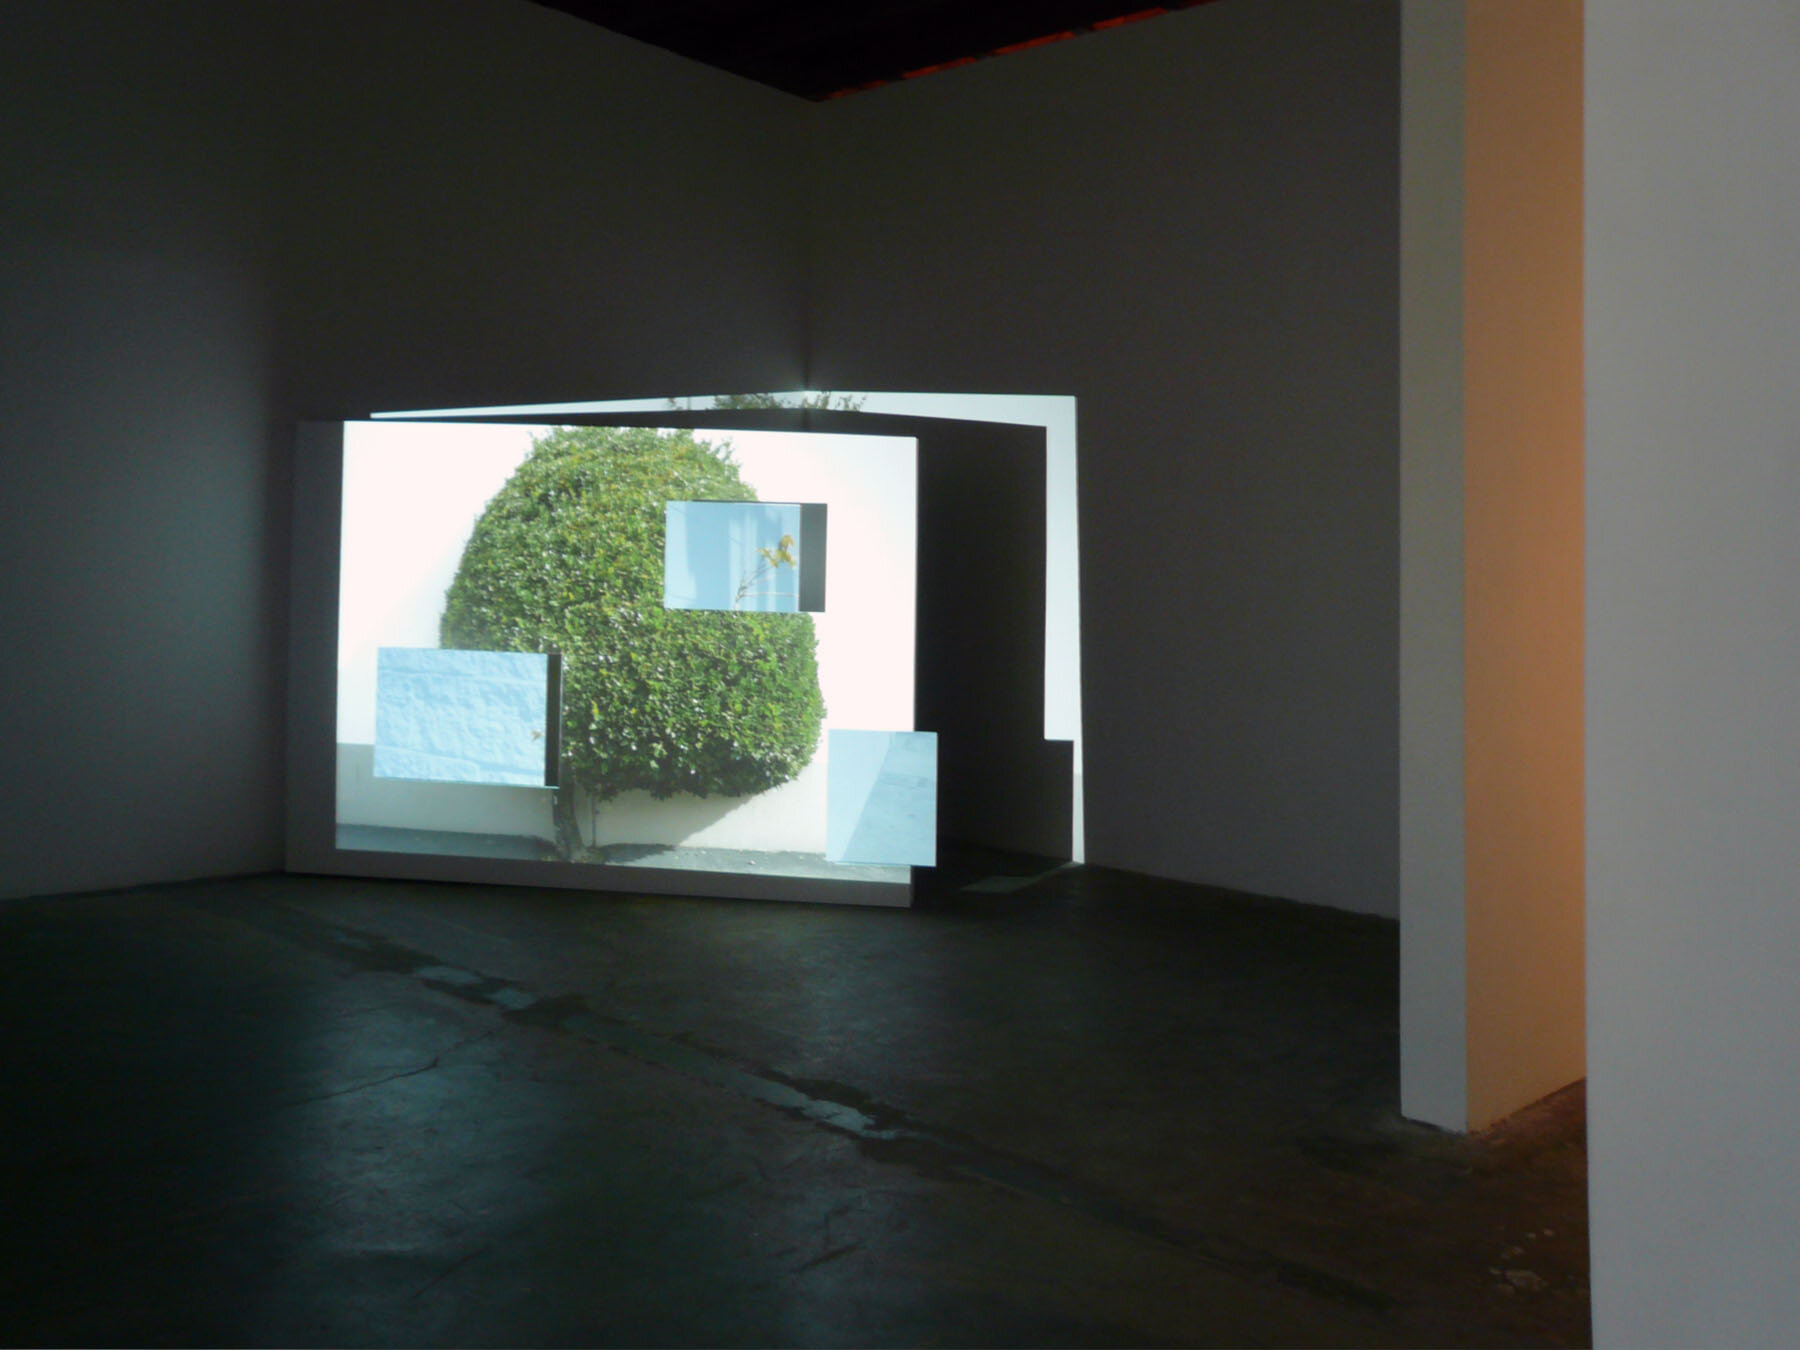   Here to There , installation view, 2007, 35-minute projected animation with 4 soundtracks, sheetrock, wood, mounted wood boxes, 72 x 100 x 65 inches 